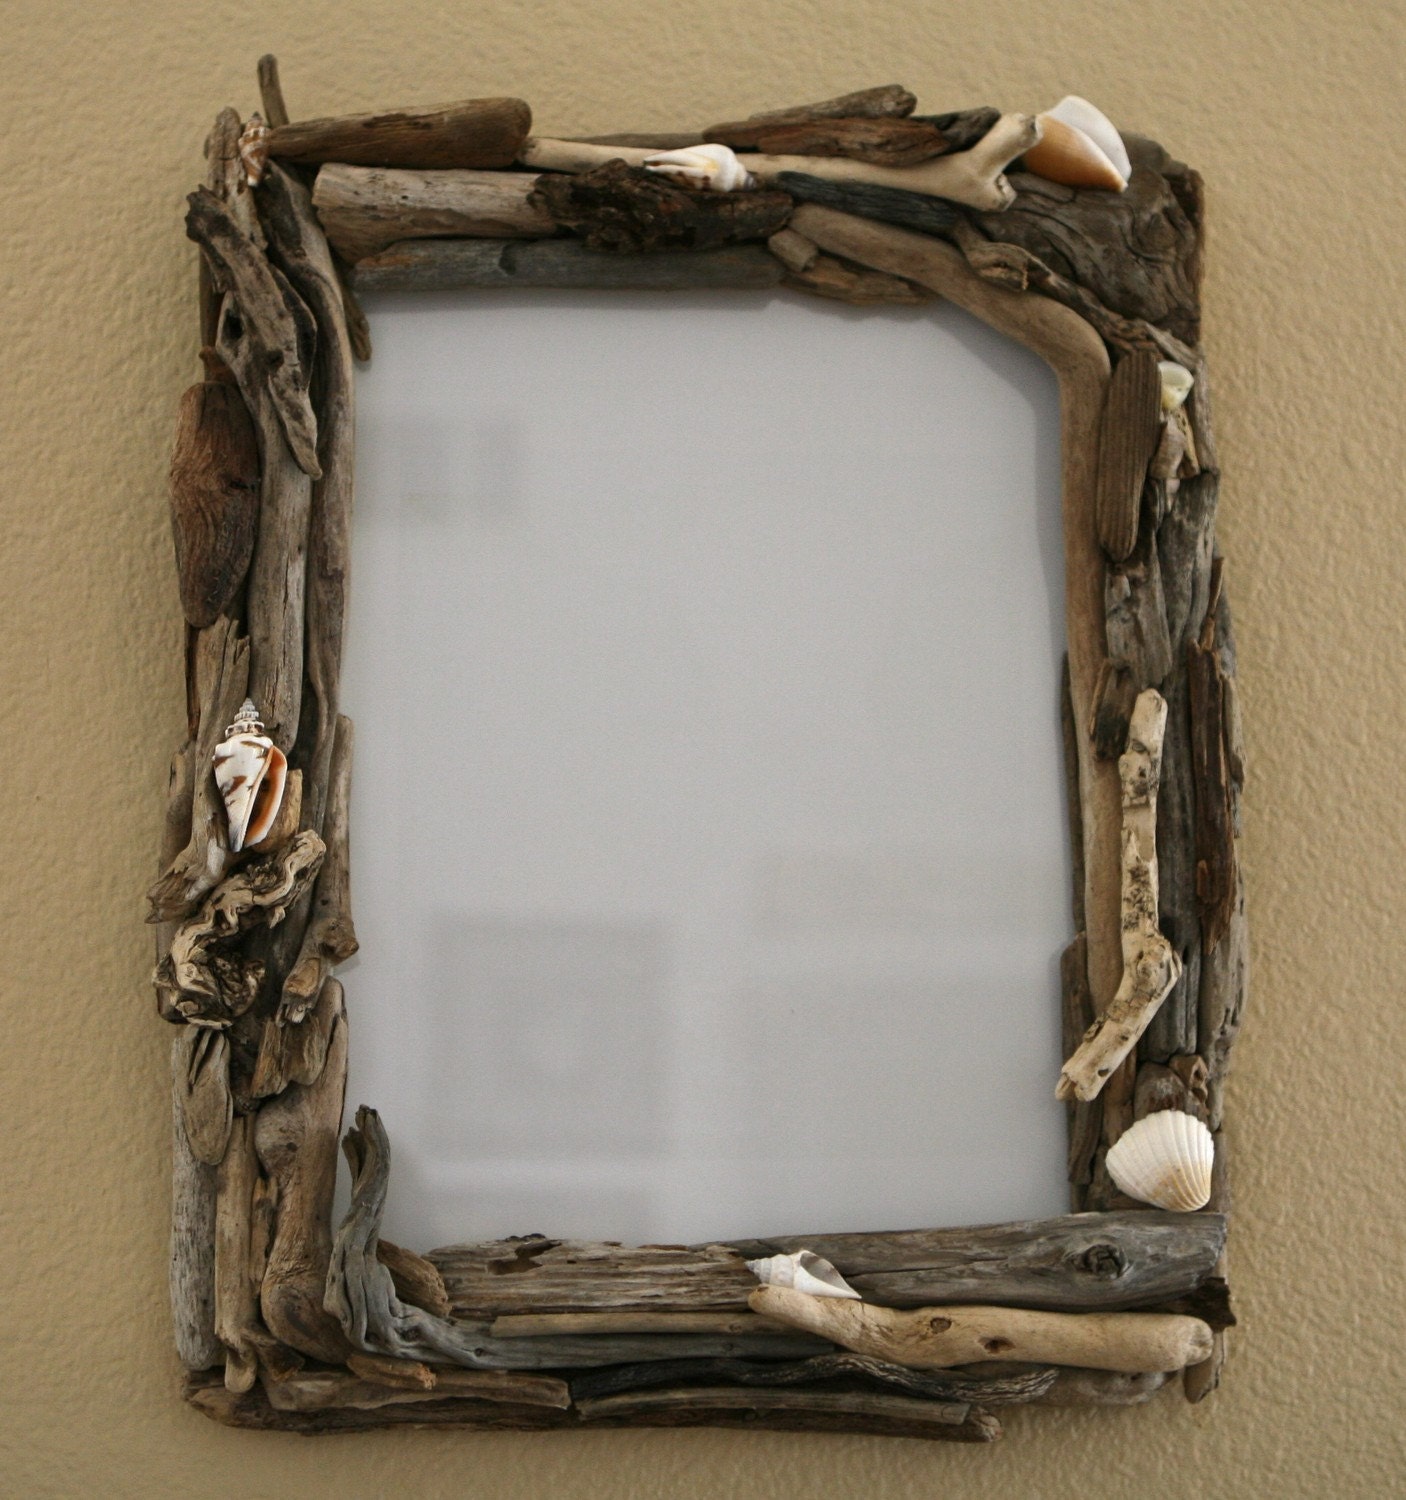 Driftwood Frame 10x13 by PacificDrift on Etsy